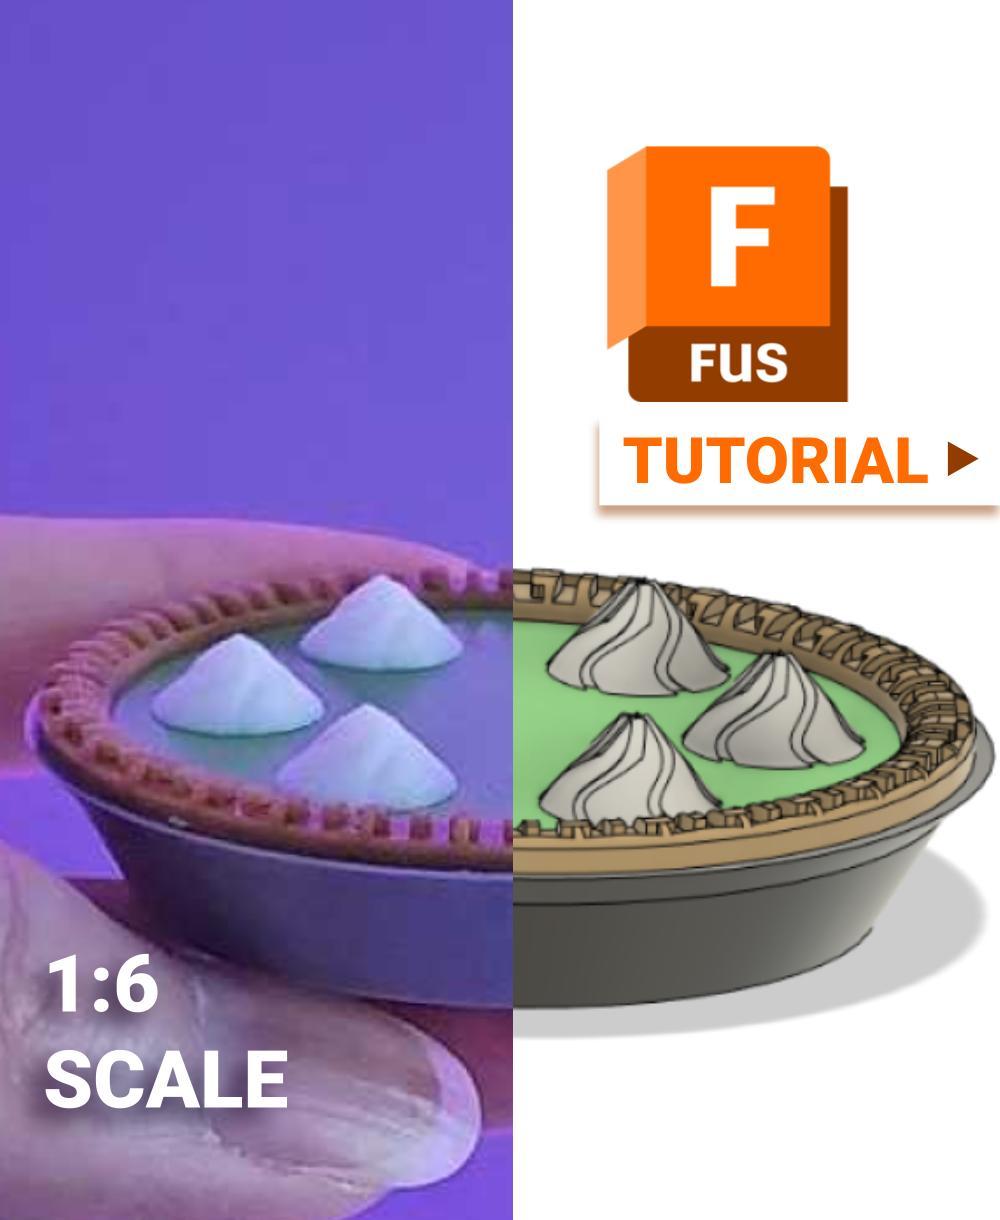 1:6 scale miniature whole pie | As seen on YouTube (Autodesk Fusion tutorial) 3d model